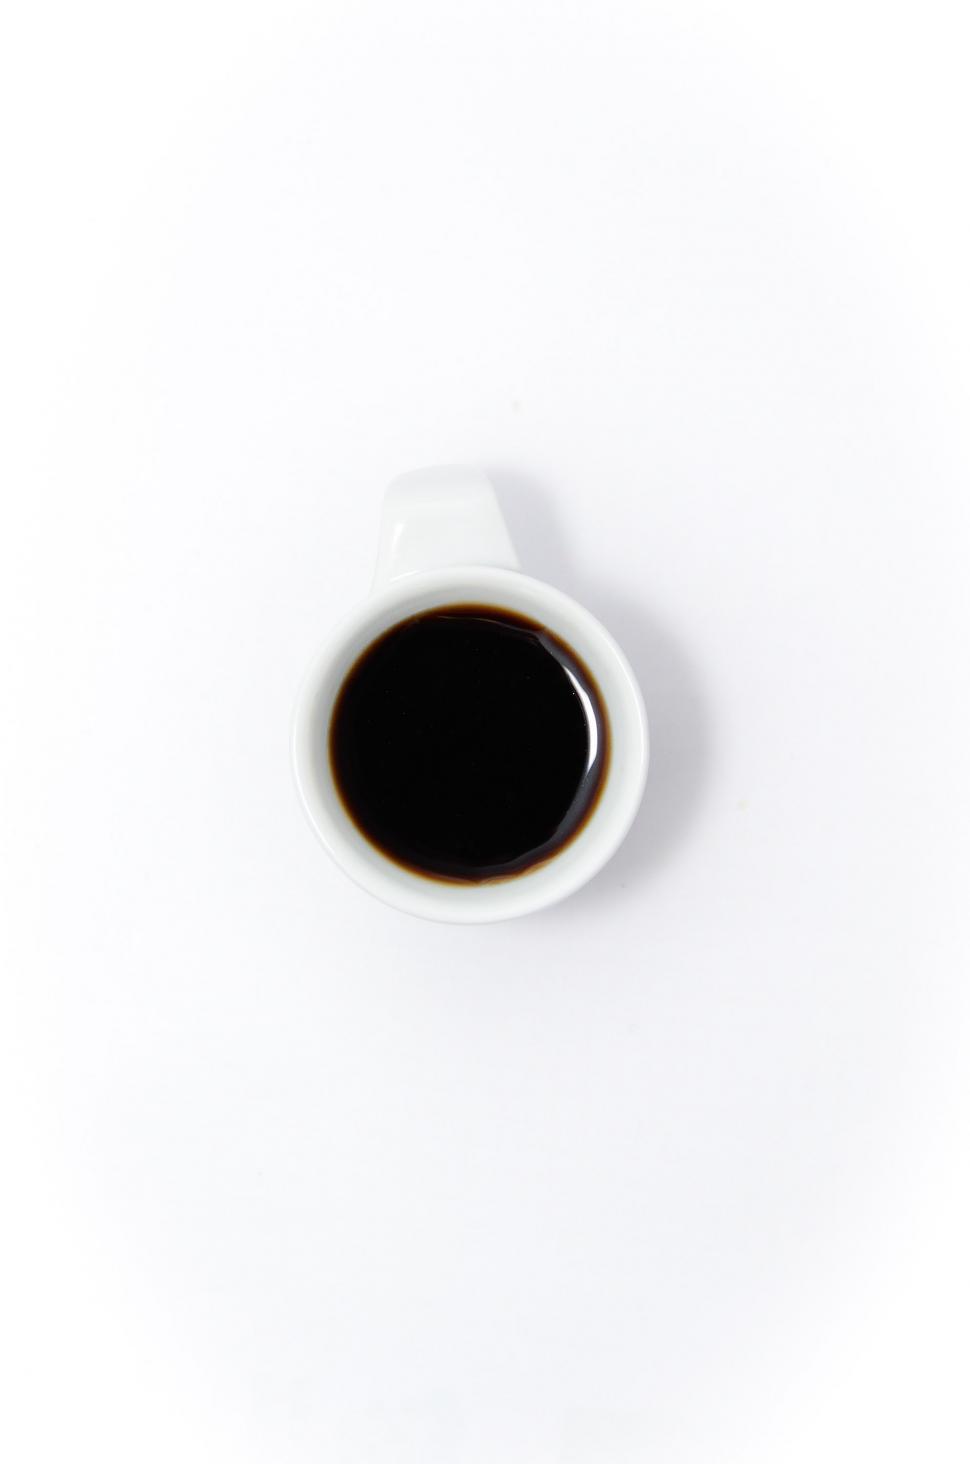 Free Image of A Cup of Coffee on a White Table 